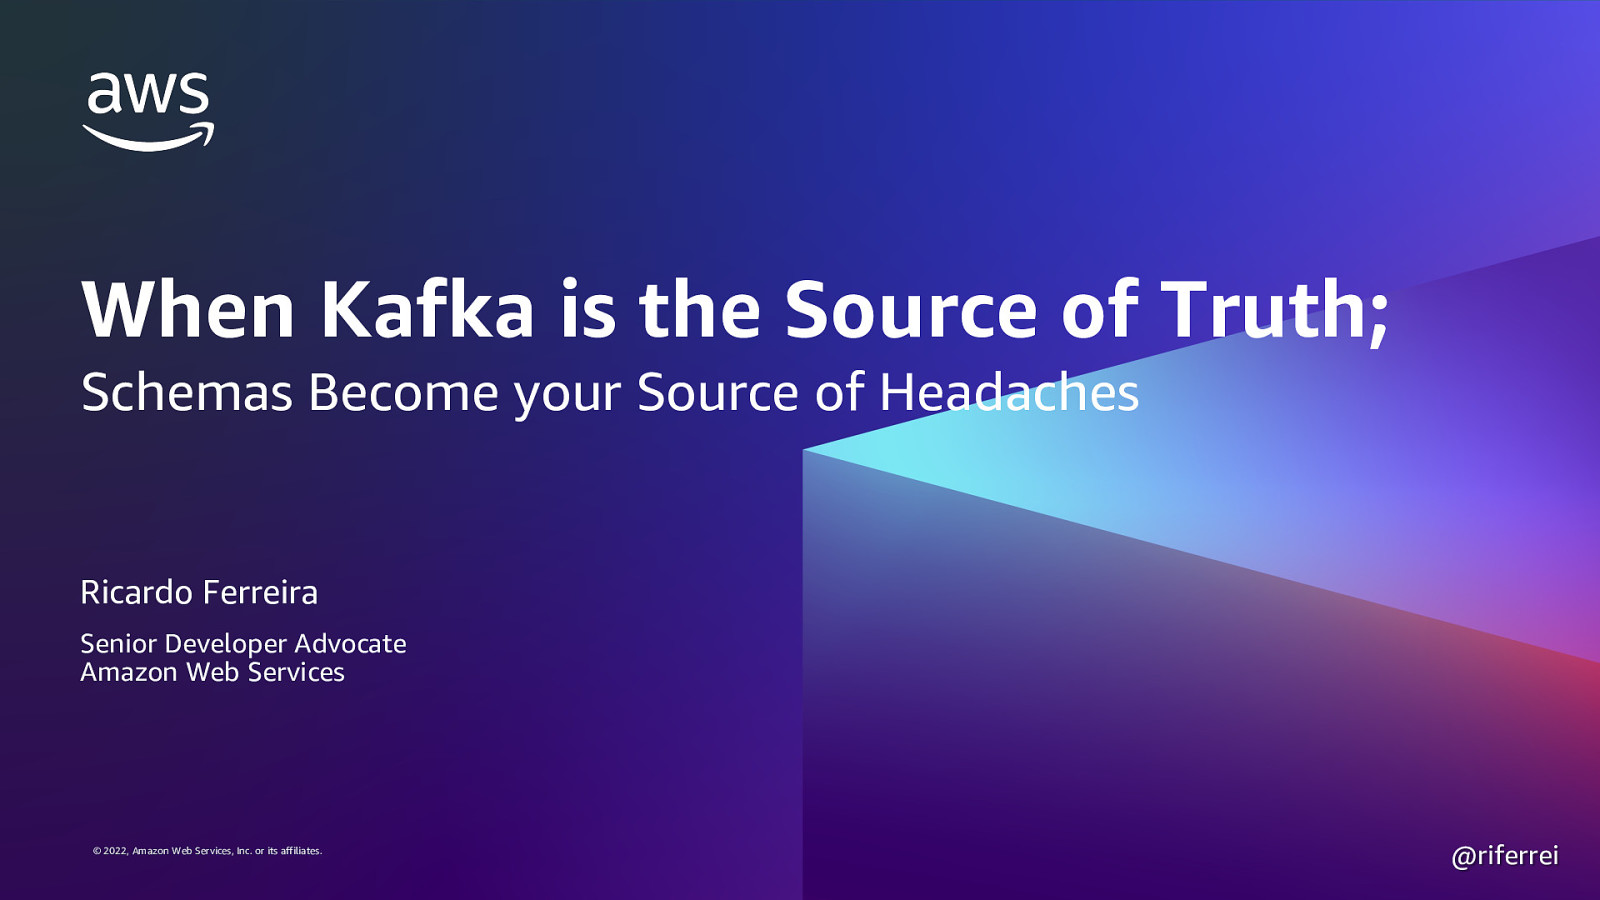 When Kafka is the source of truth; schemas become your source of headaches